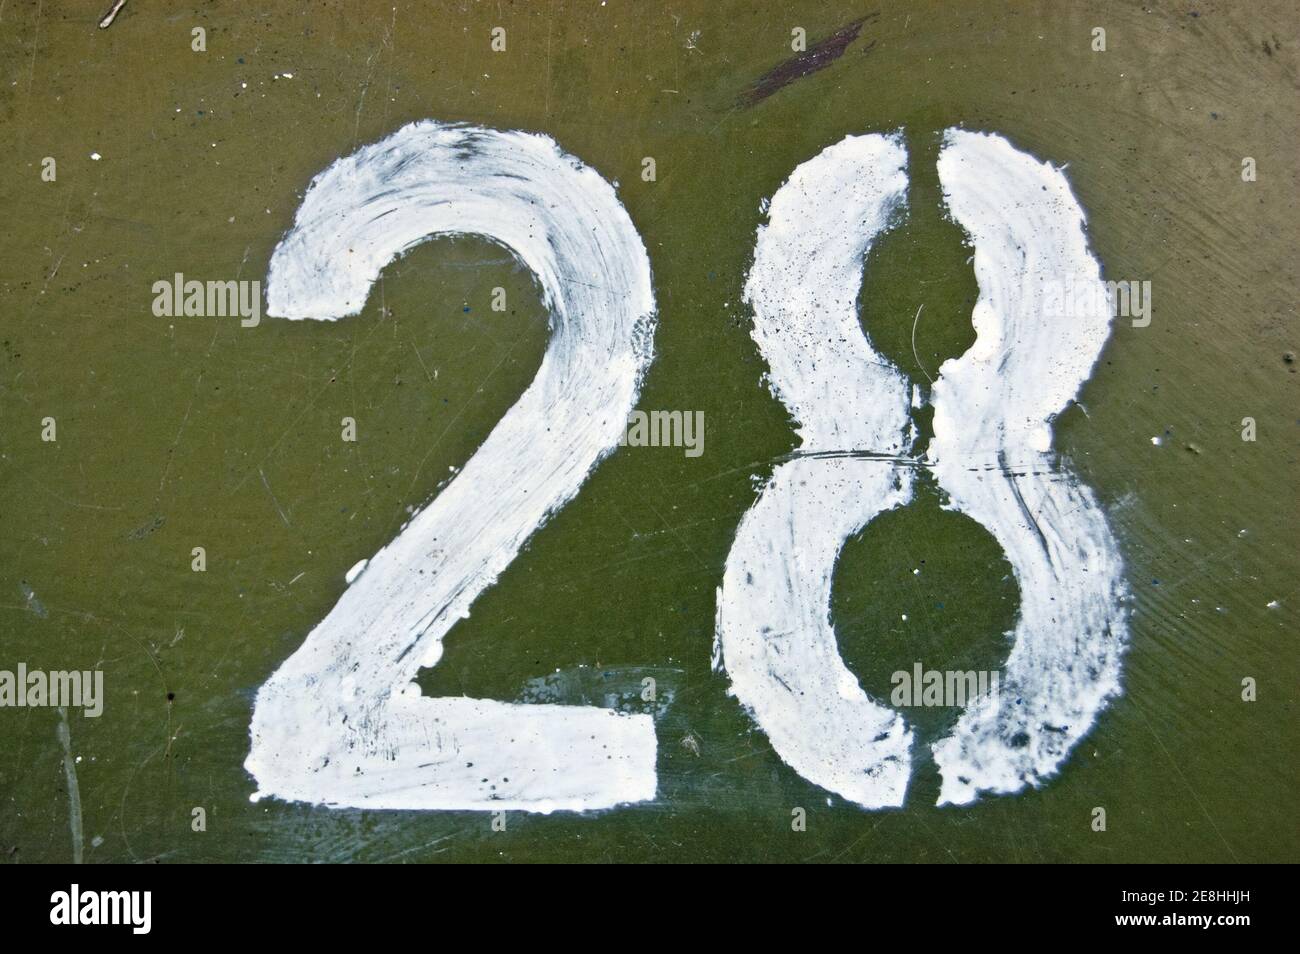 A stencil painting of the number 28. Outer door of a junction box on a public pavement. Stock Photo